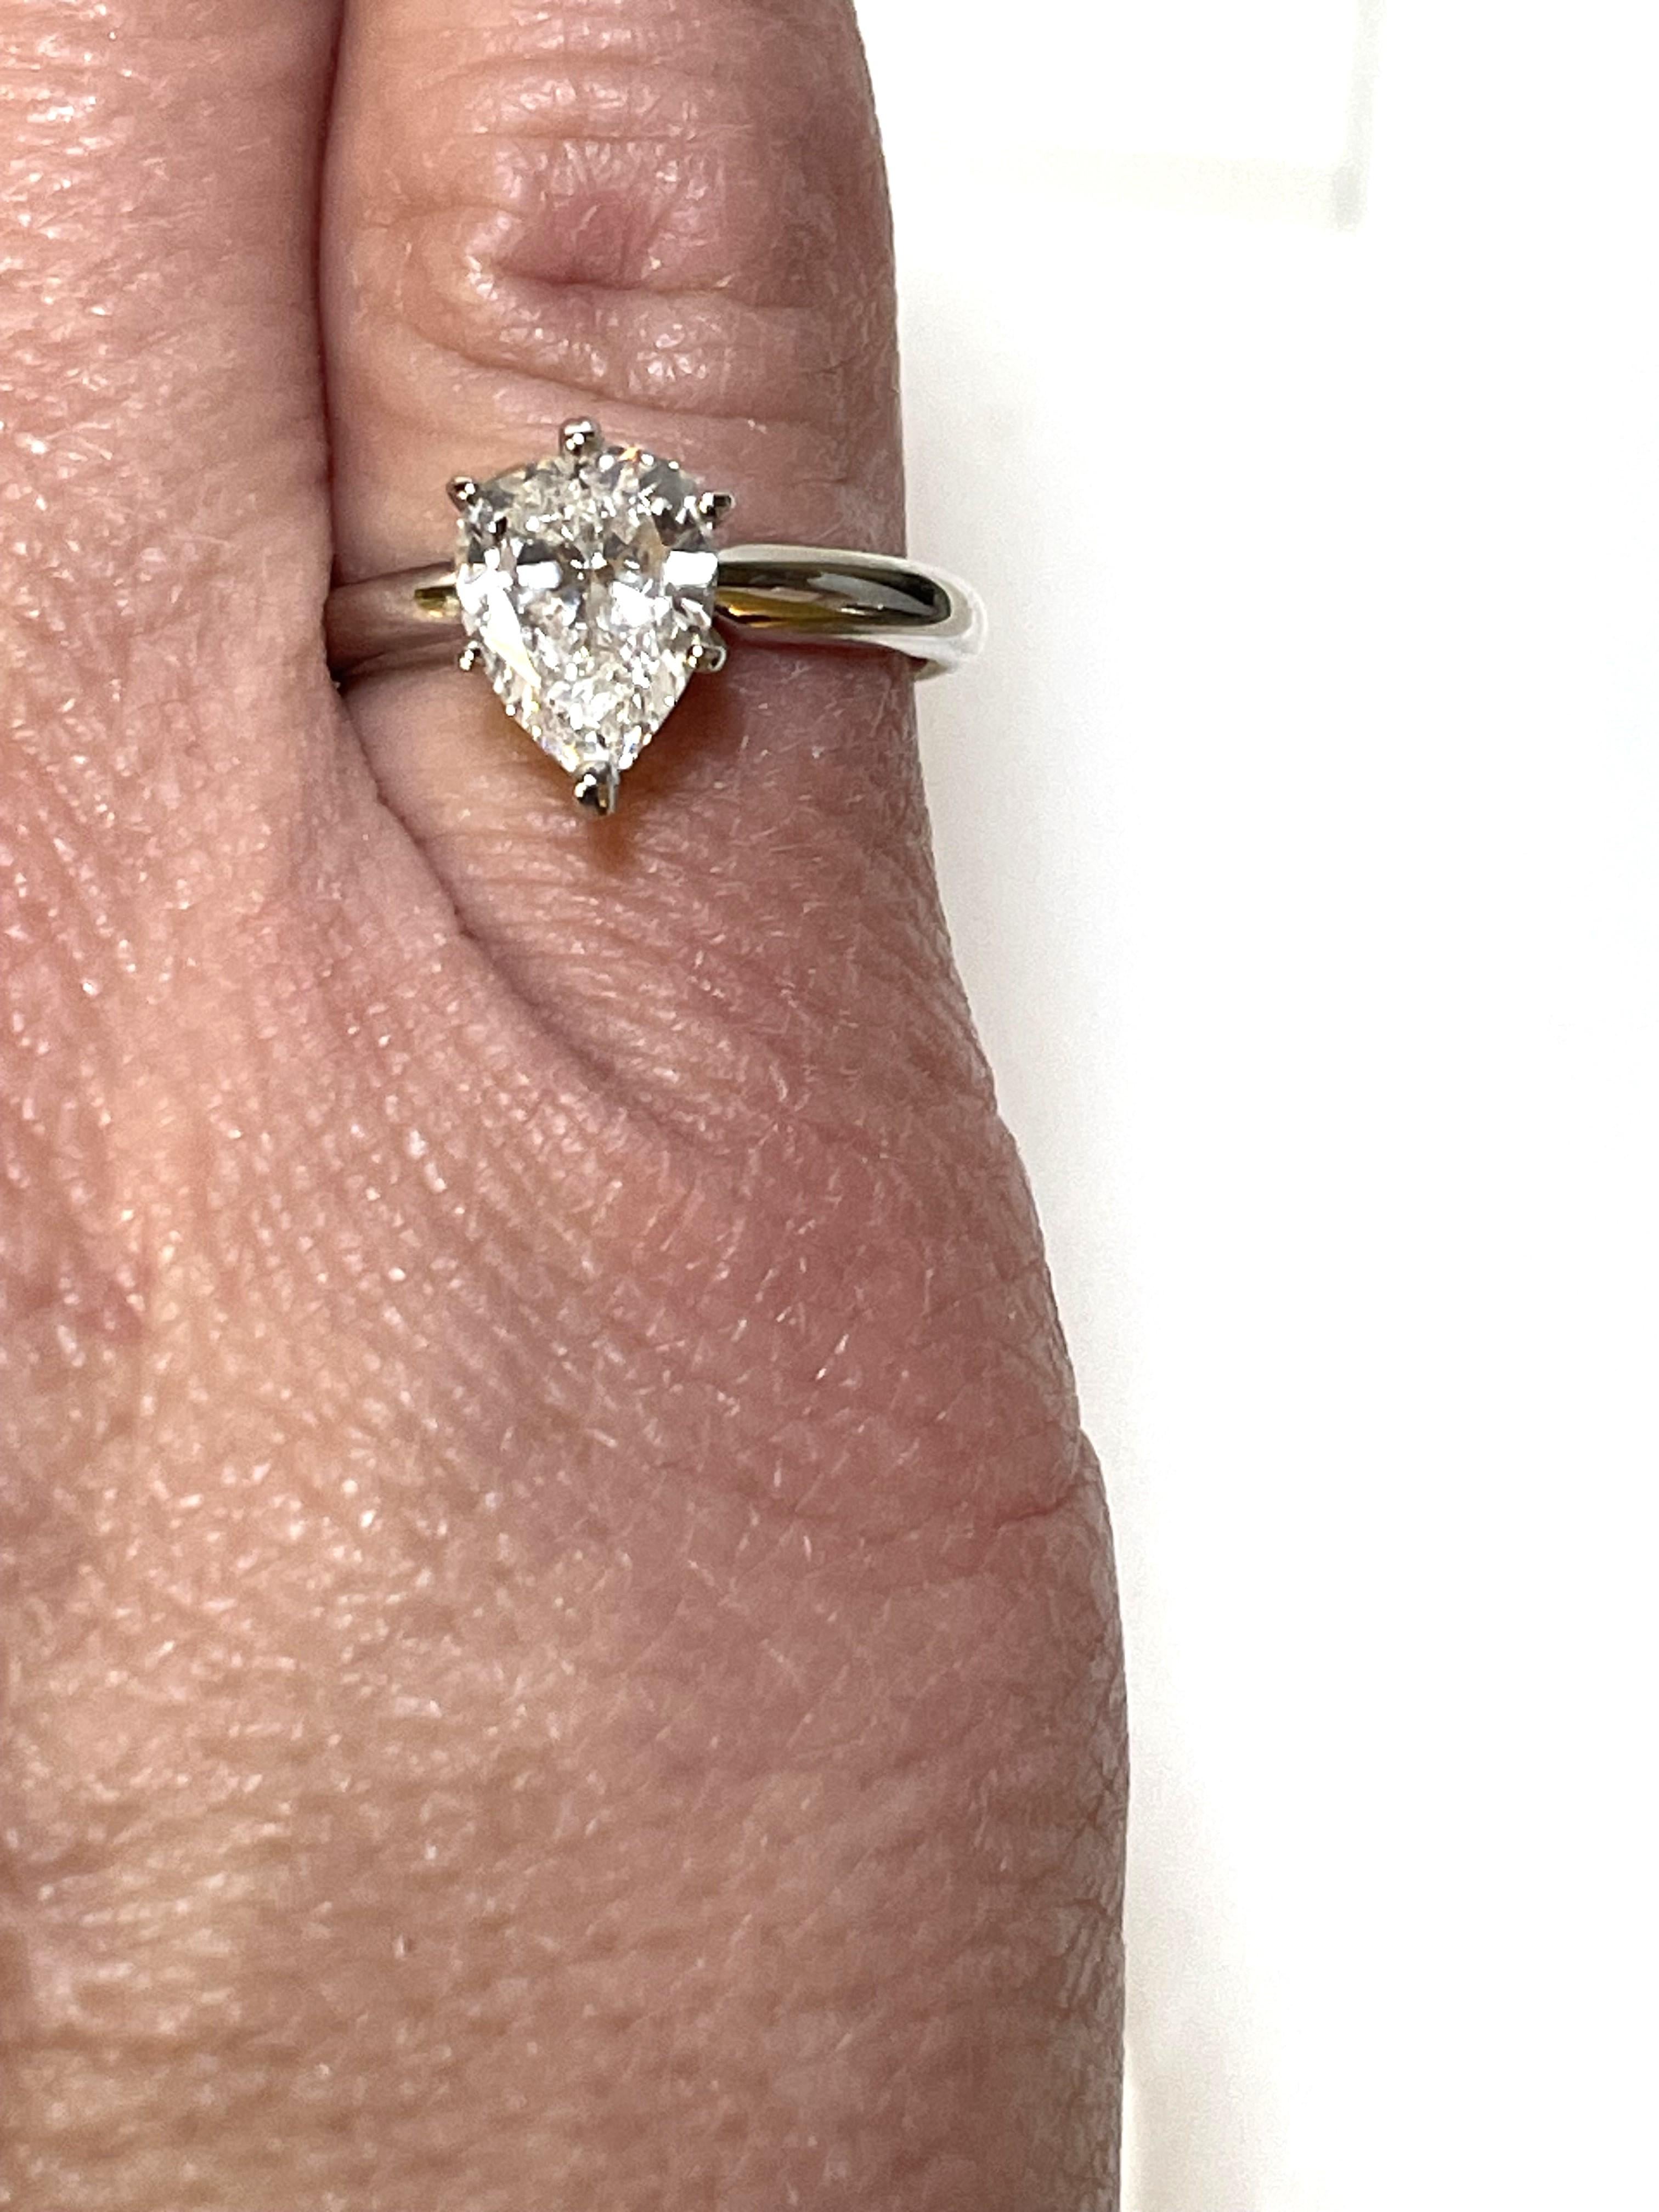 1.69 Carat Pear Shape Diamond Ring In Excellent Condition For Sale In Cincinnati, OH